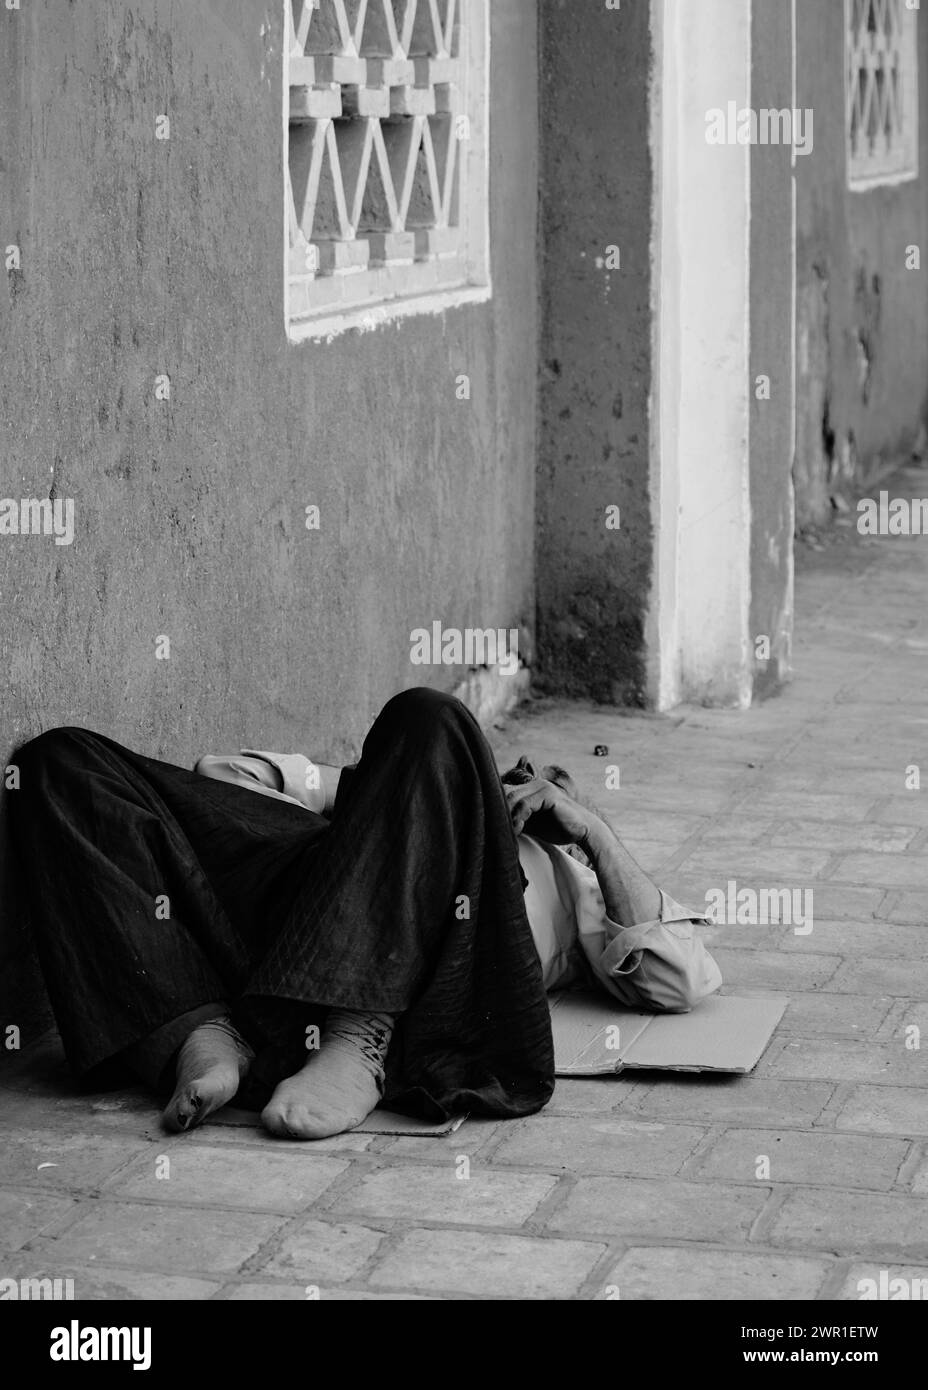 Abyenah , Iran, 07.01.2023: An old man sleeping outside ground, old man tradition cloths. Stock Photo